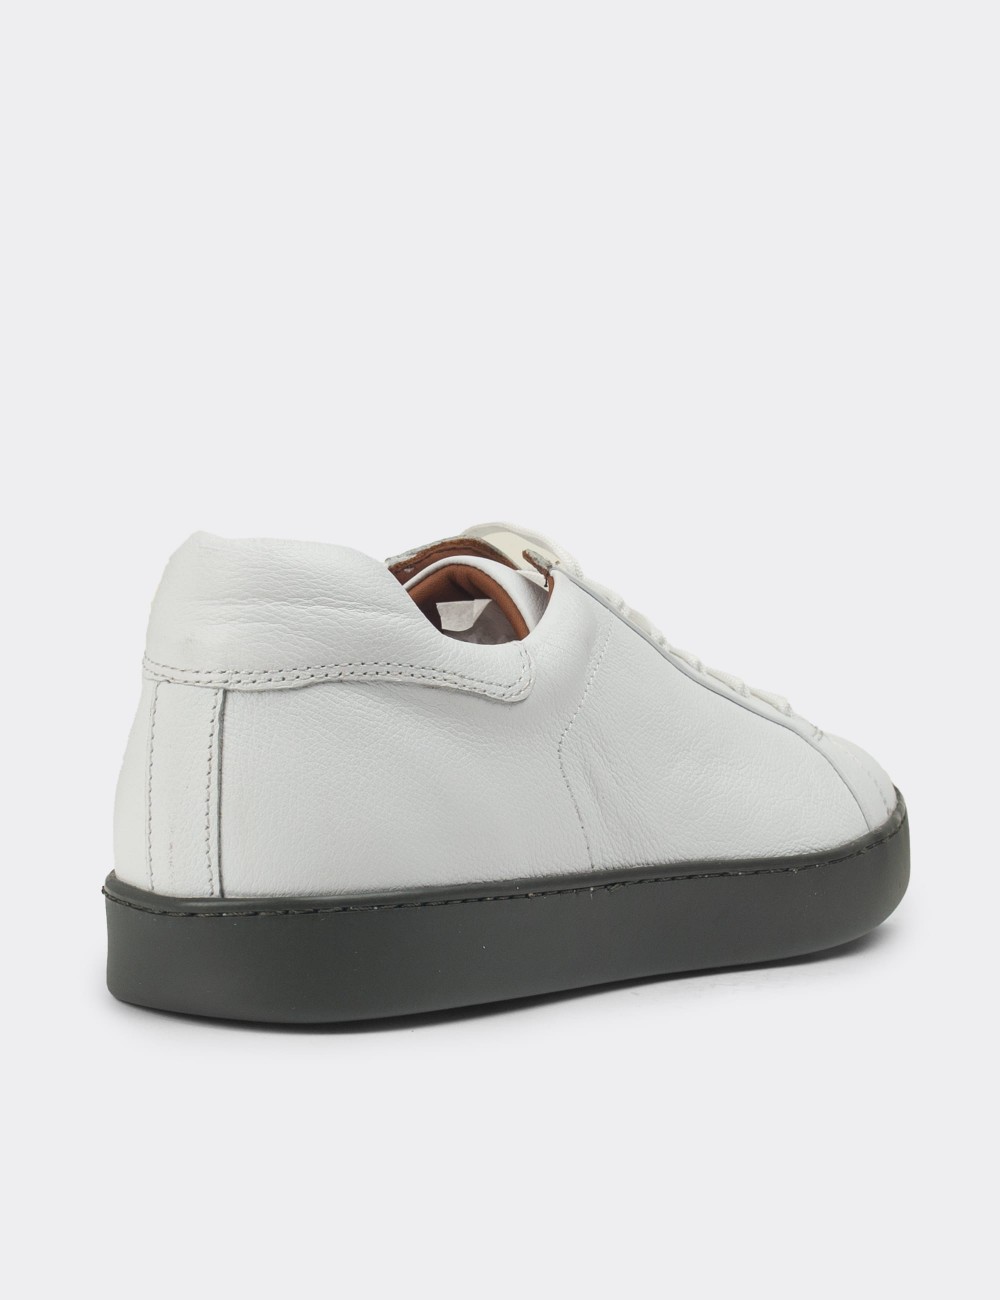 White Leather Sneakers - 01829MBYZC13